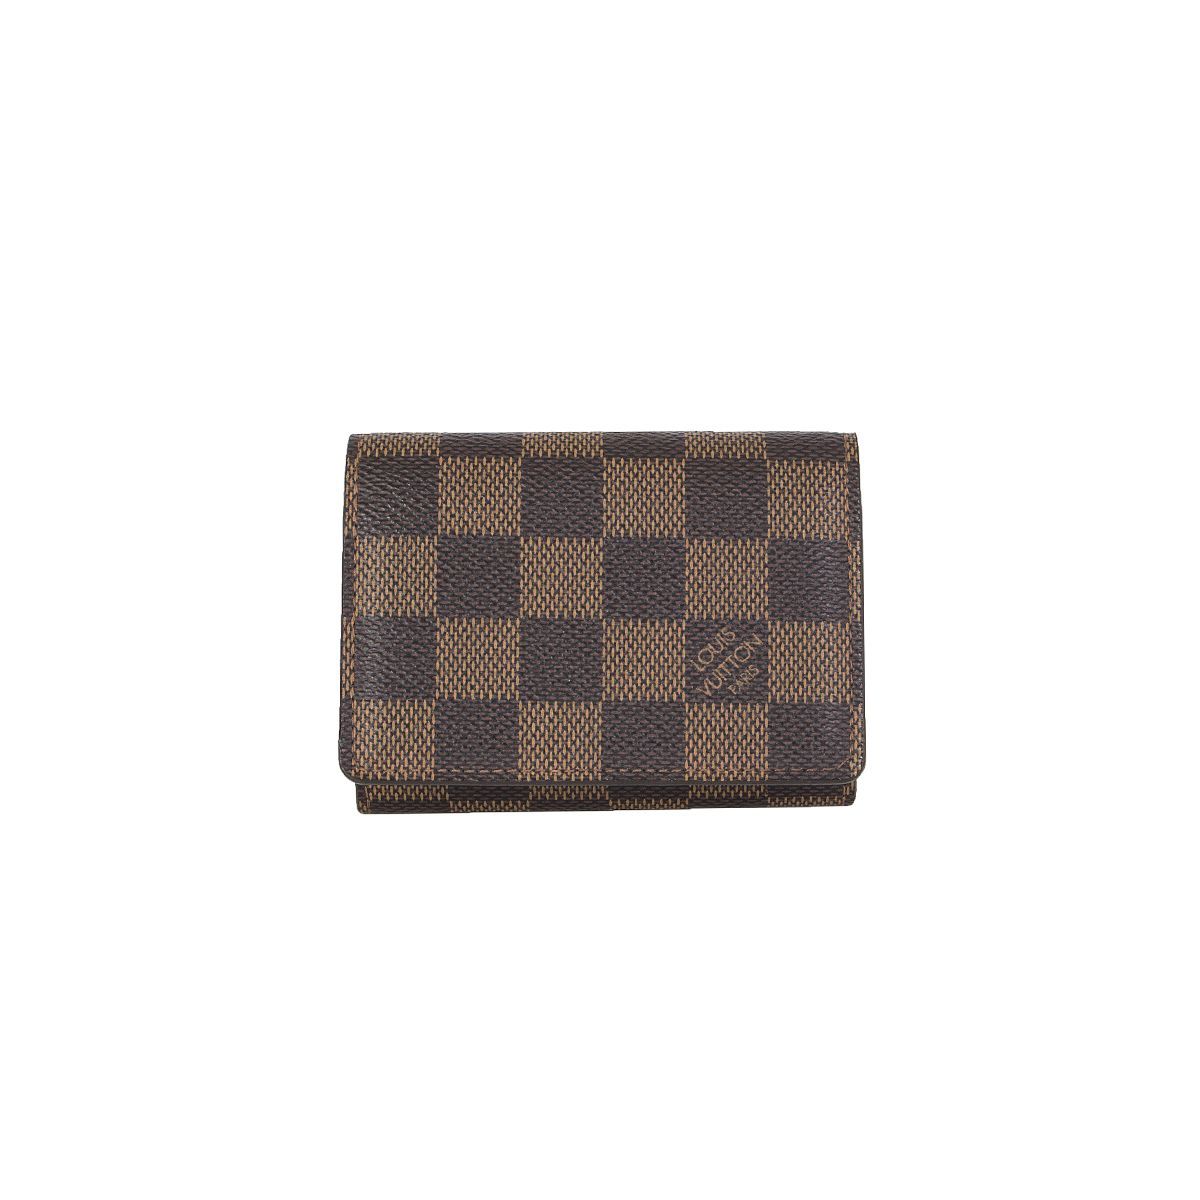 Authentic Second Hand Louis Vuitton Monogram Business Card Holder  PSS20001520  THE FIFTH COLLECTION